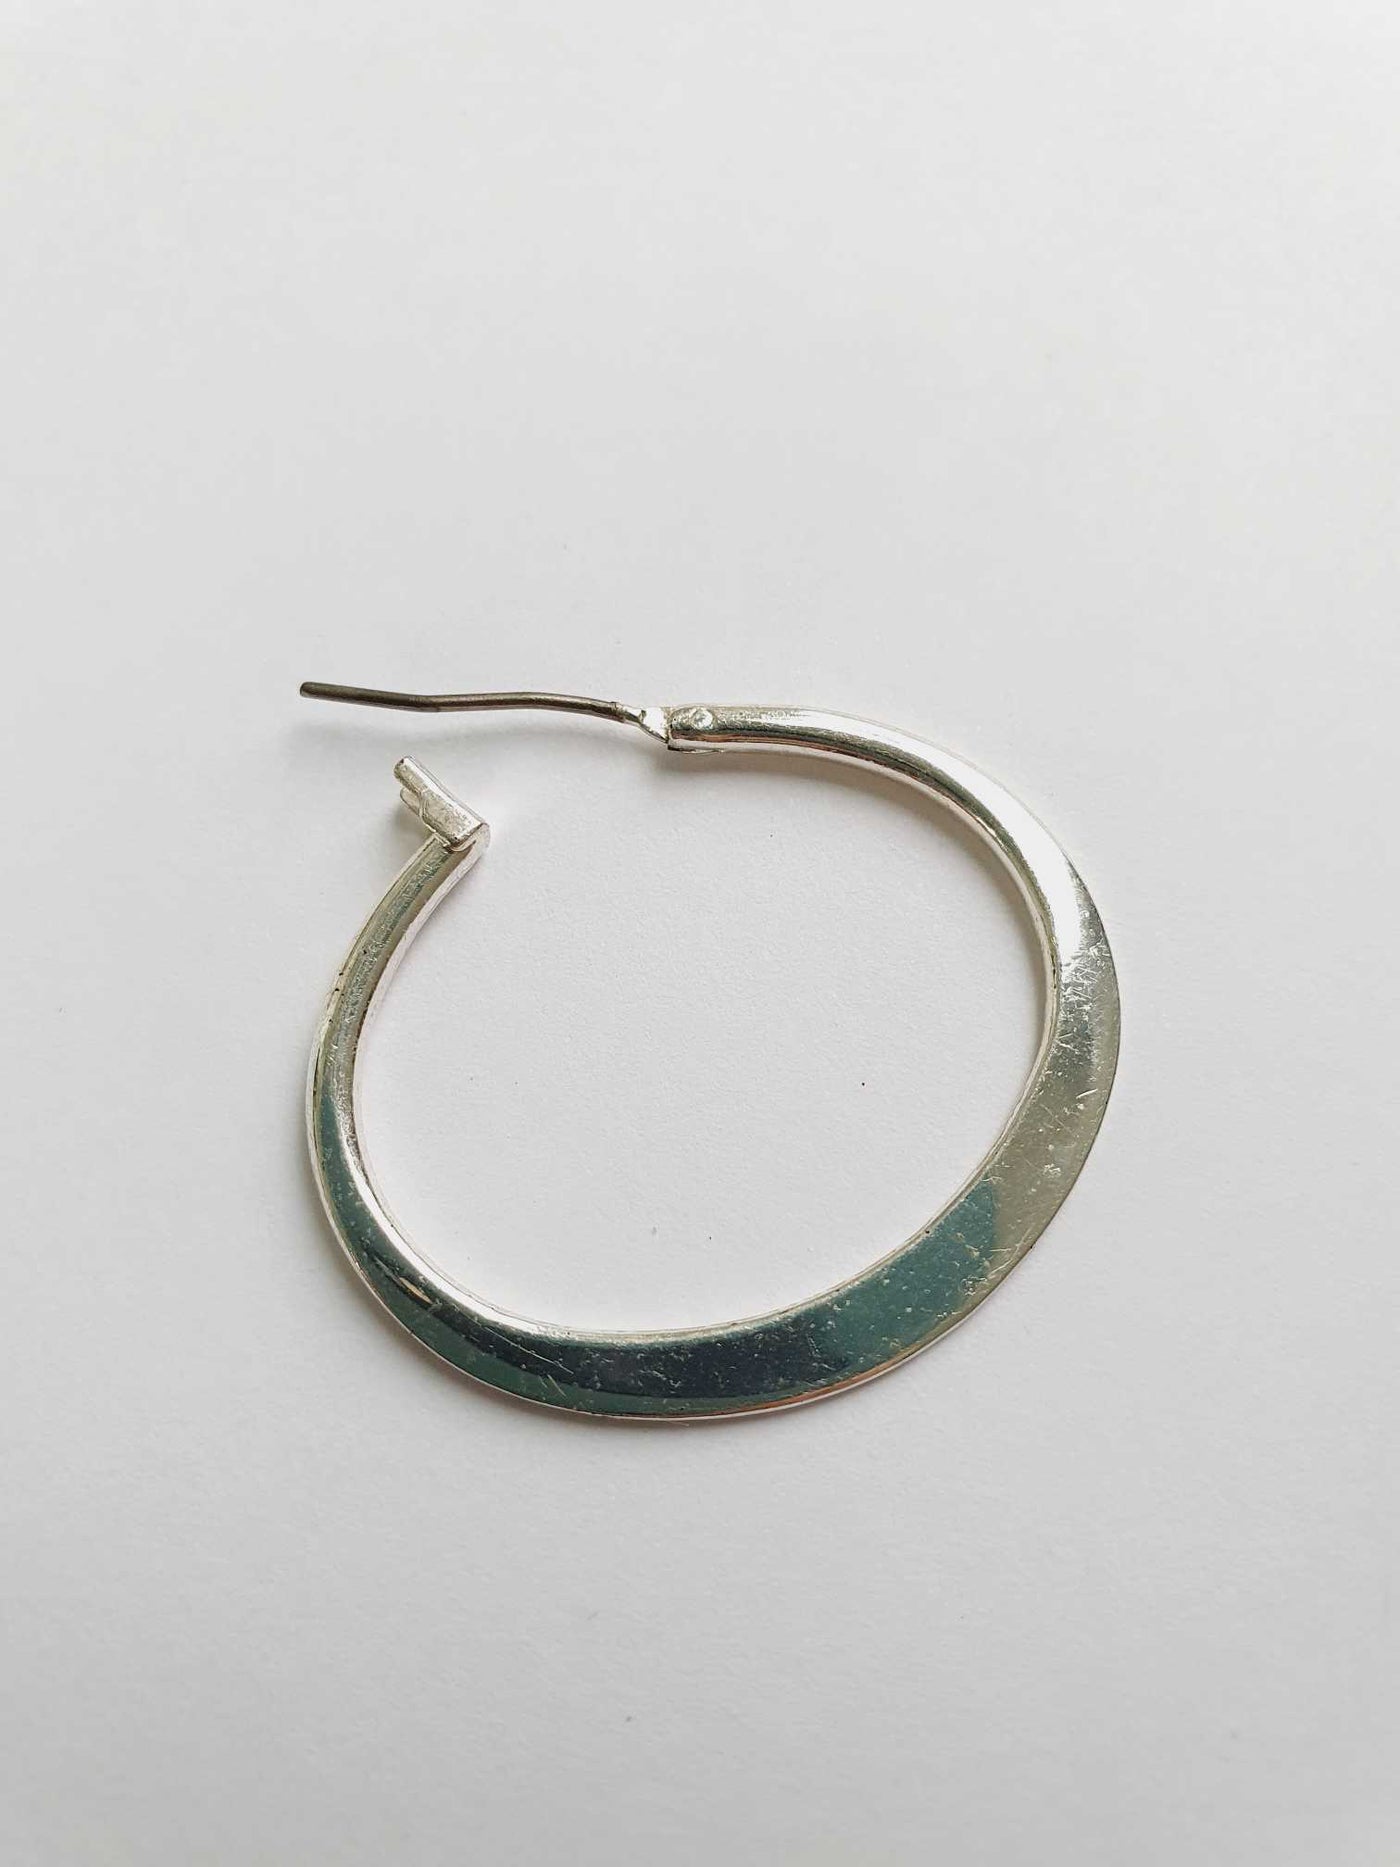 Vintage Silver Toned Oval Hoops